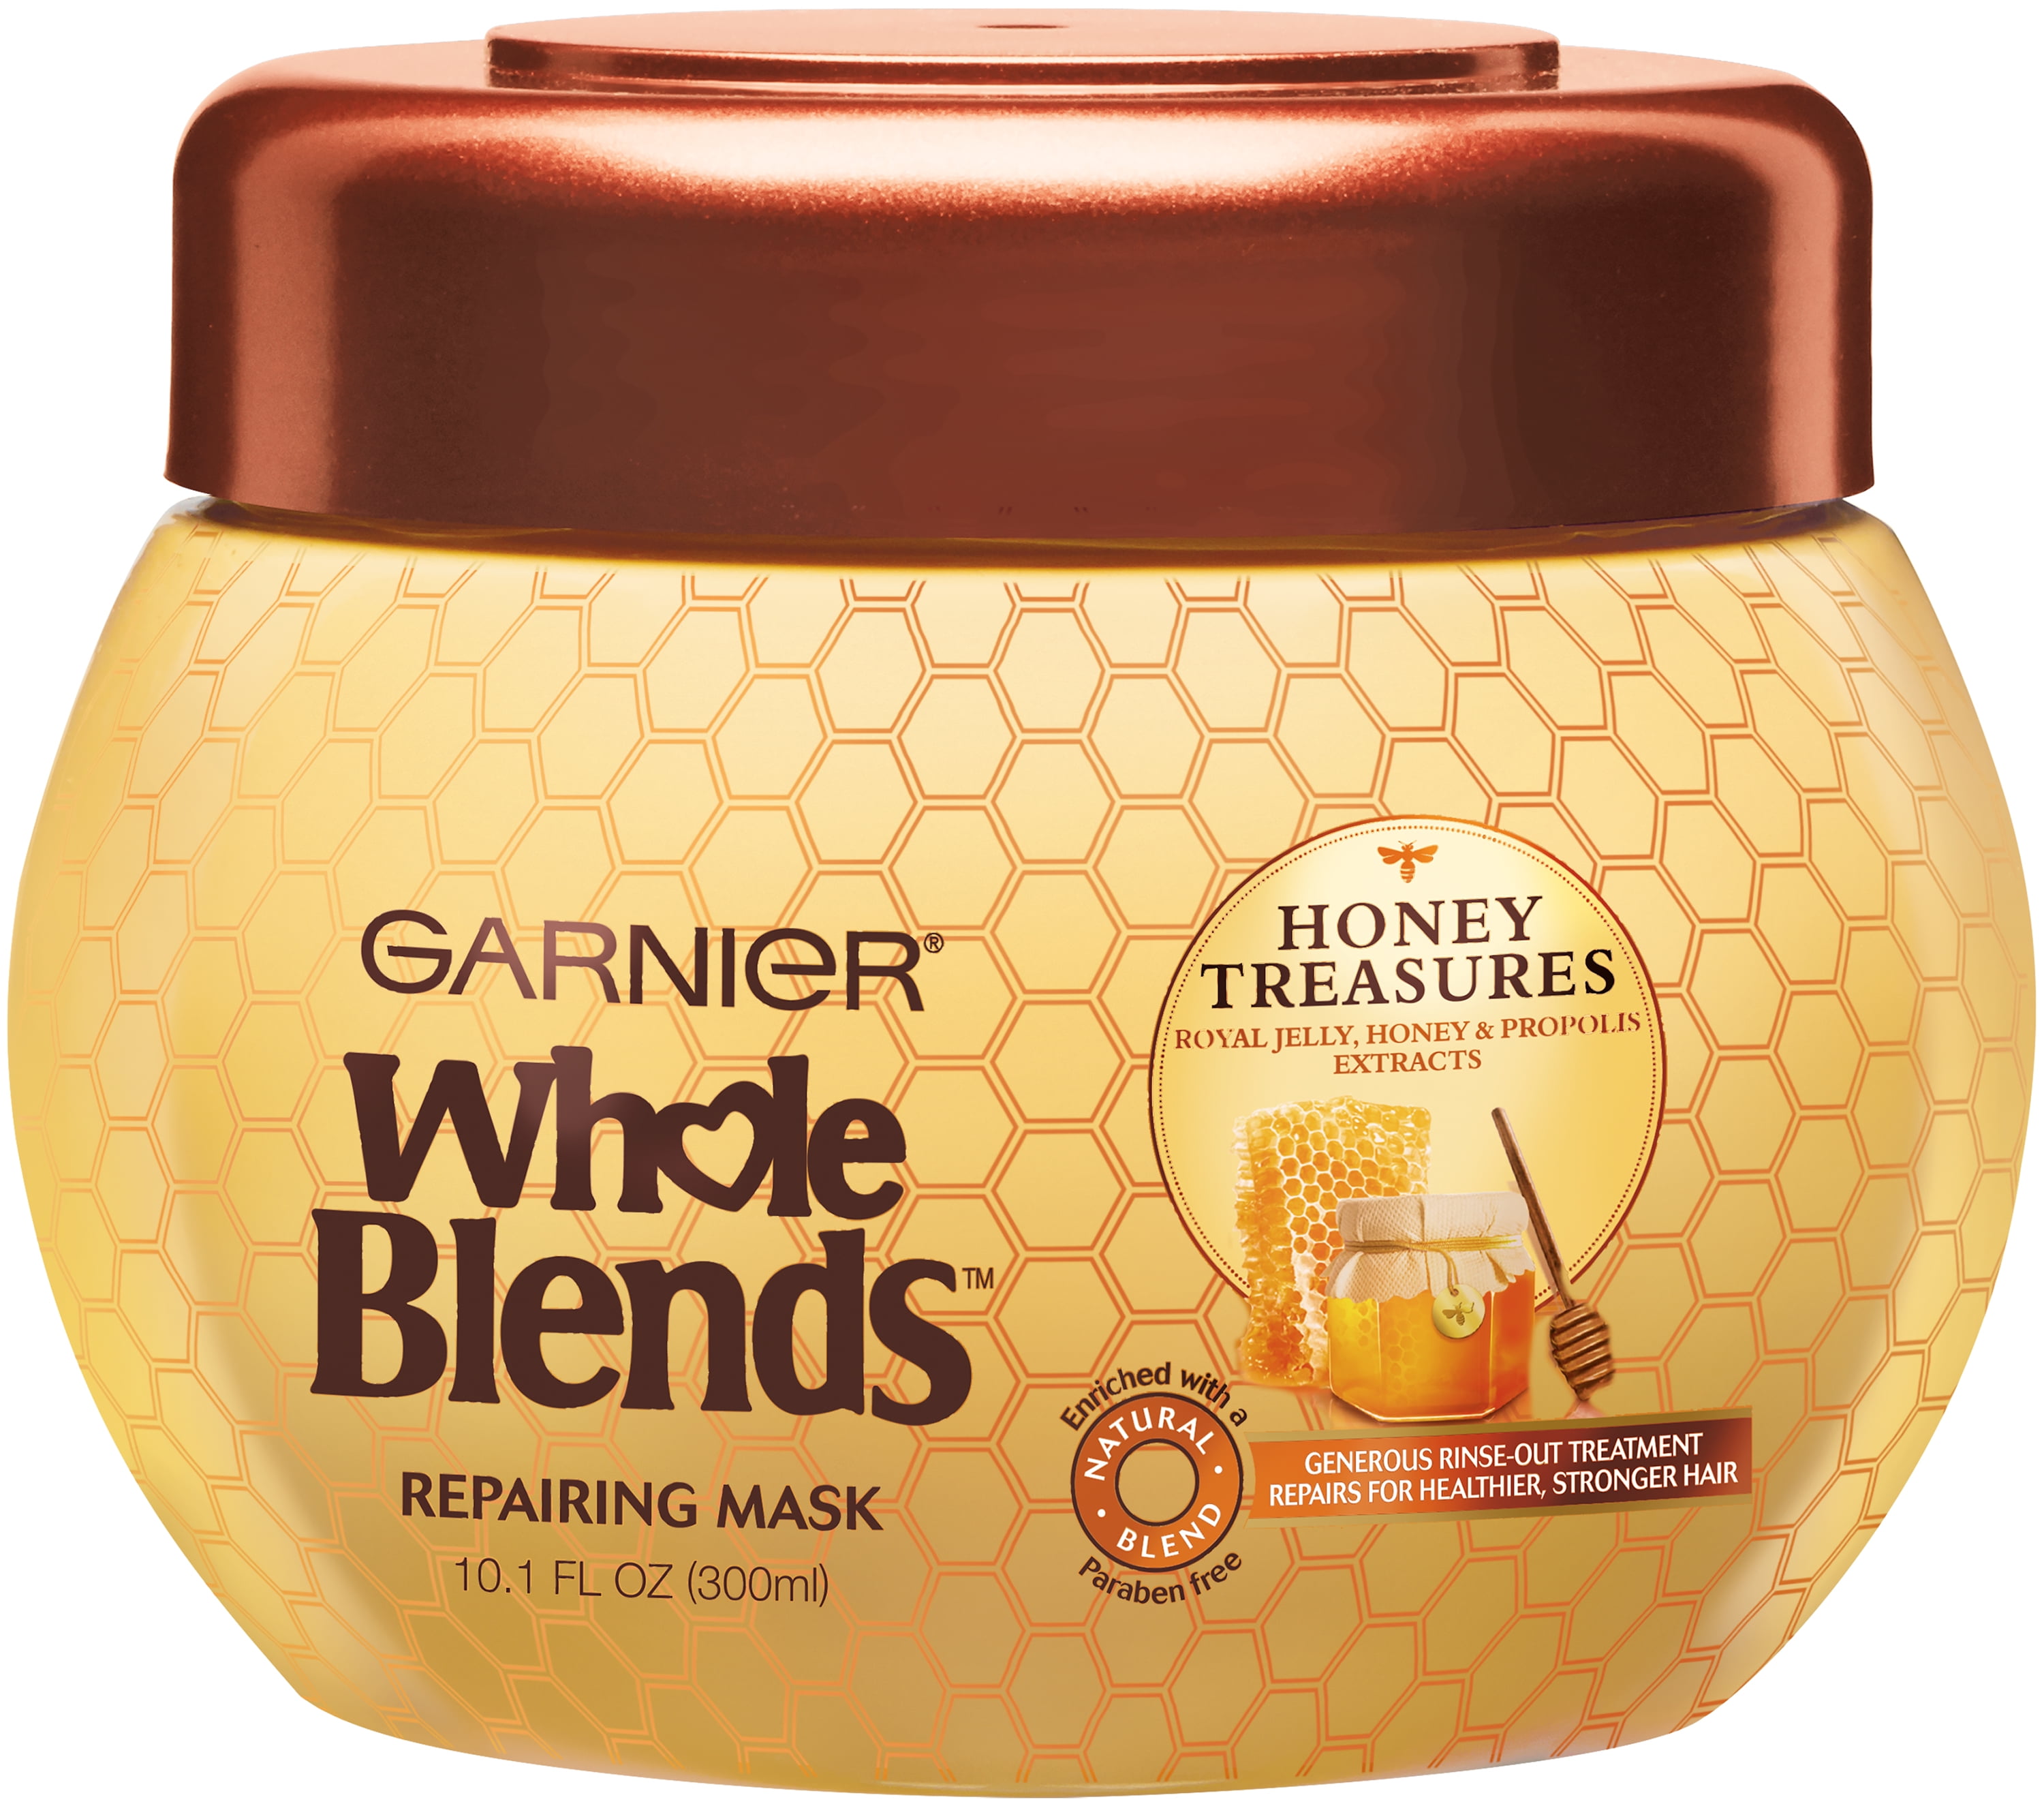 Garnier Whole Blends Repairing Mask with Royal Jelly Honey Propolis  Extracts,  fl oz 